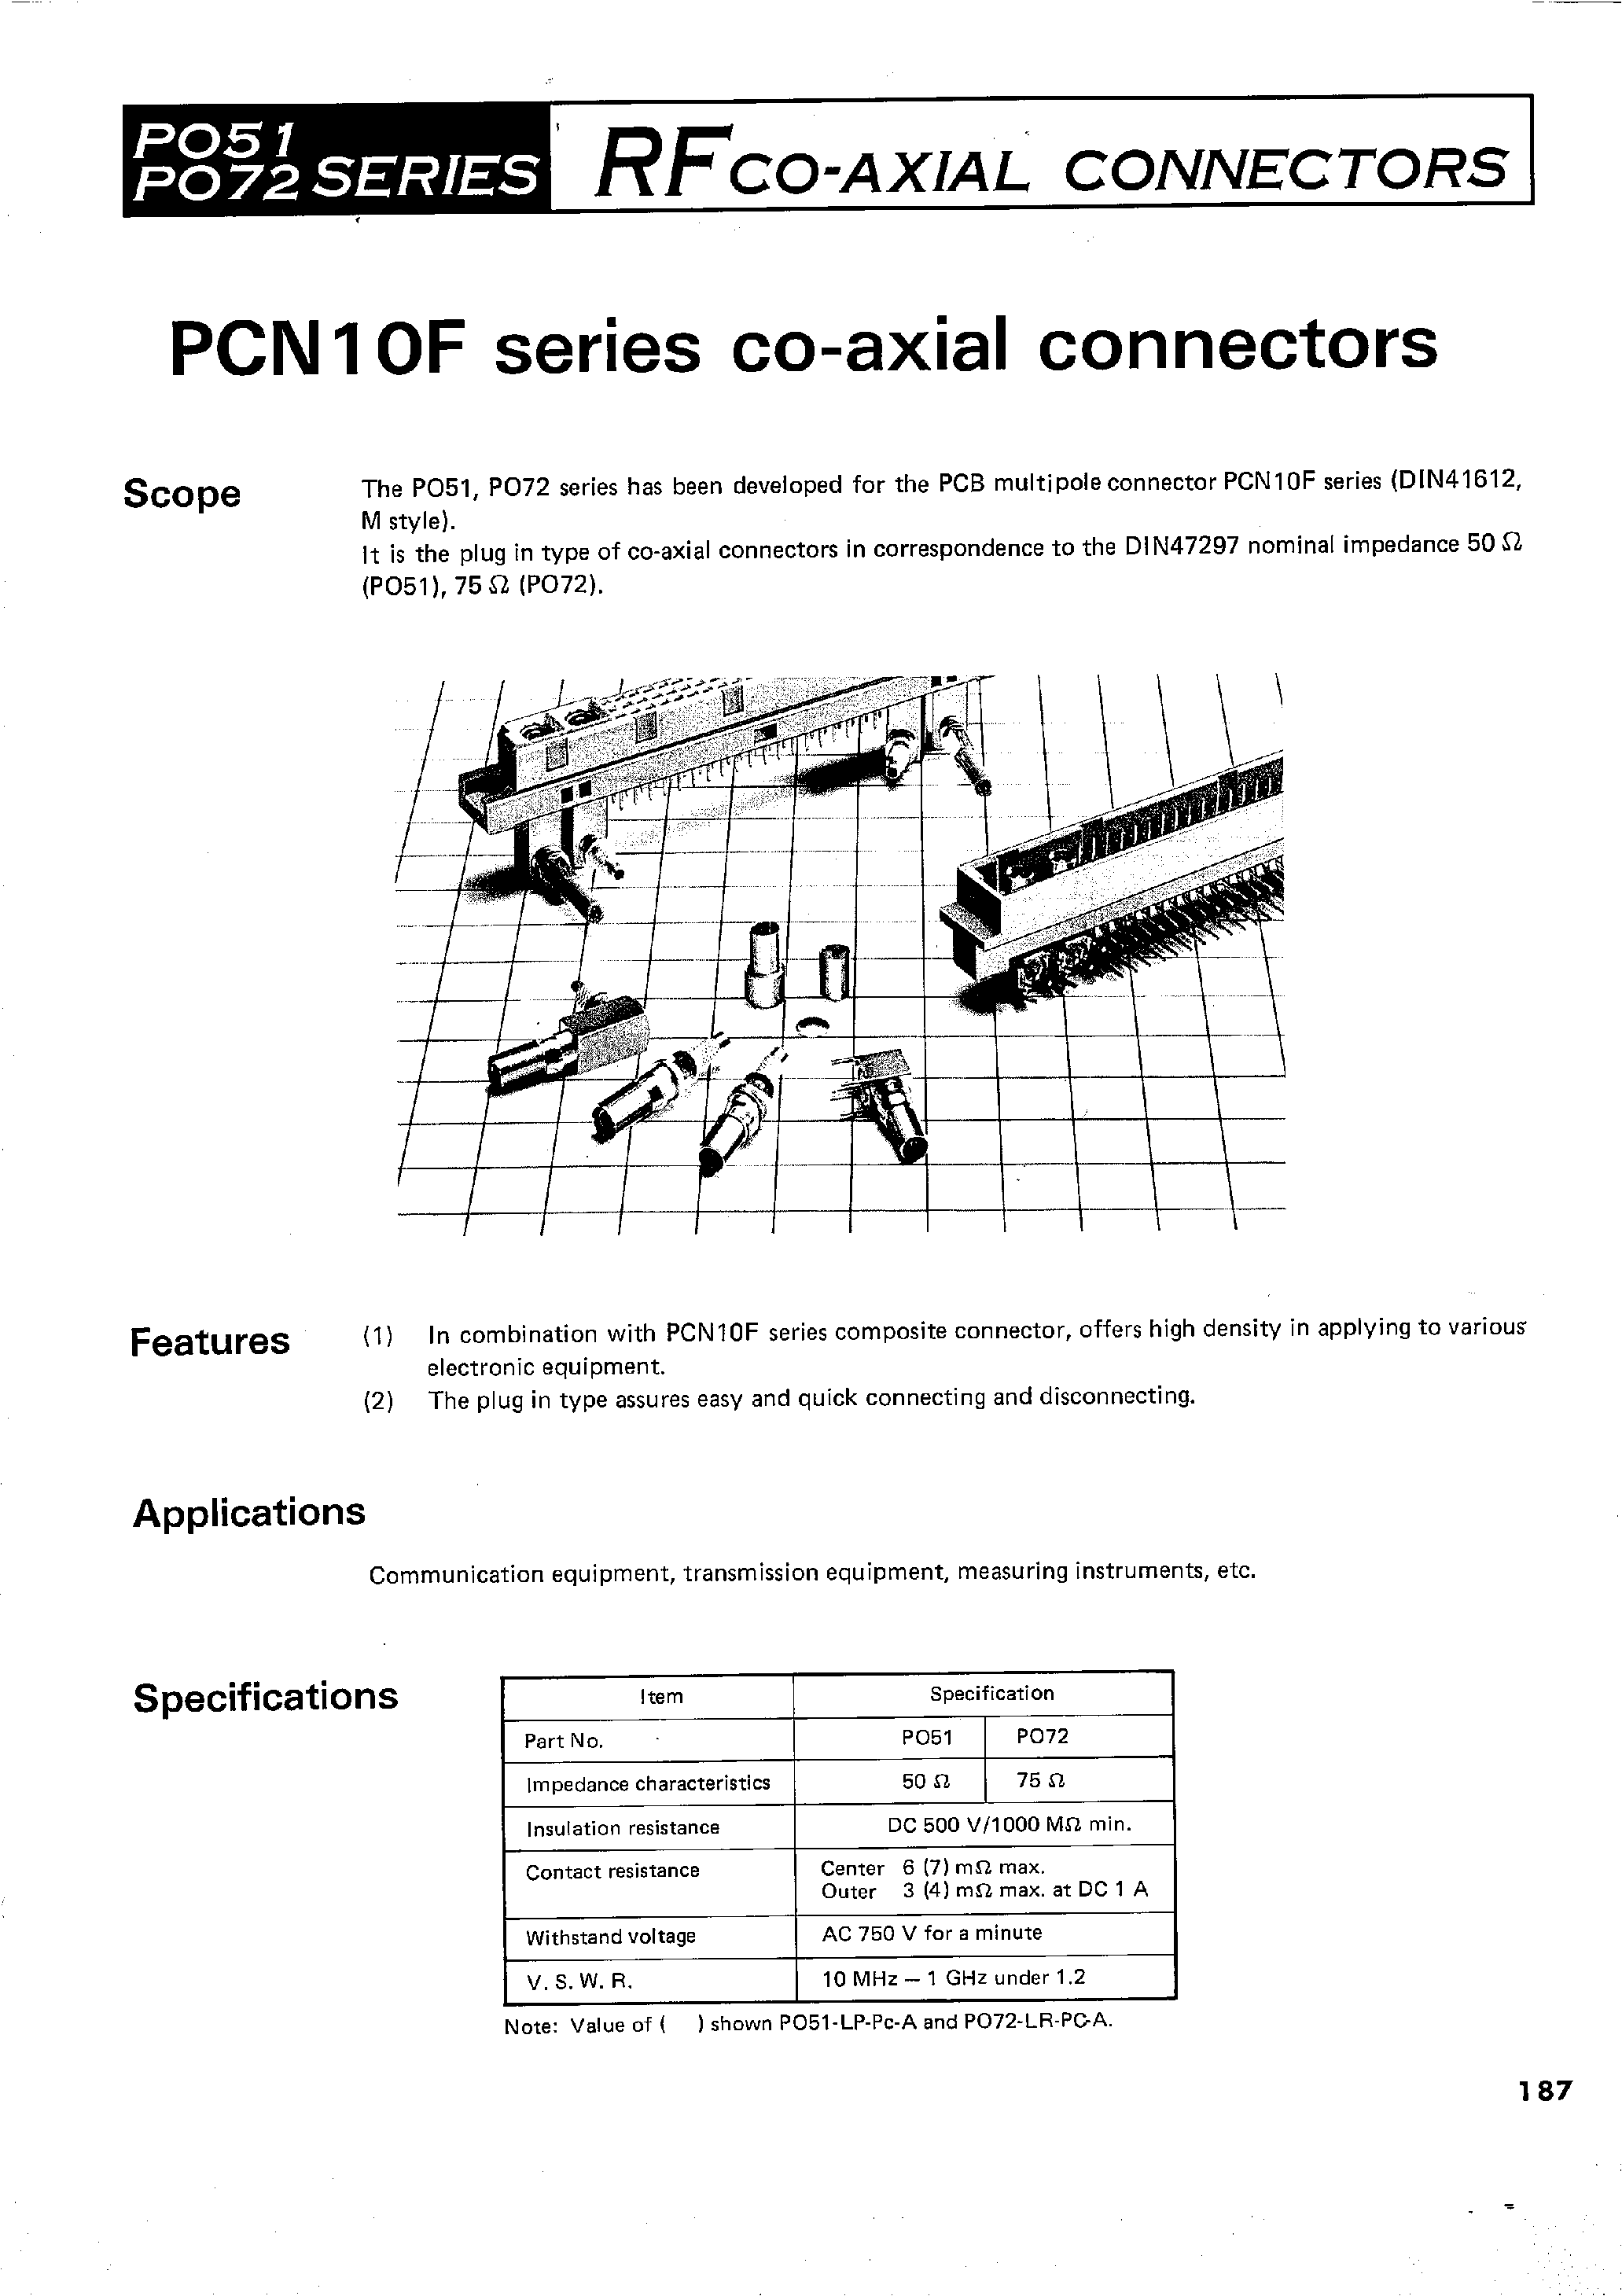 Datasheet PO51P-T-1S - RFCO-AXIAL CONNECTORS page 1